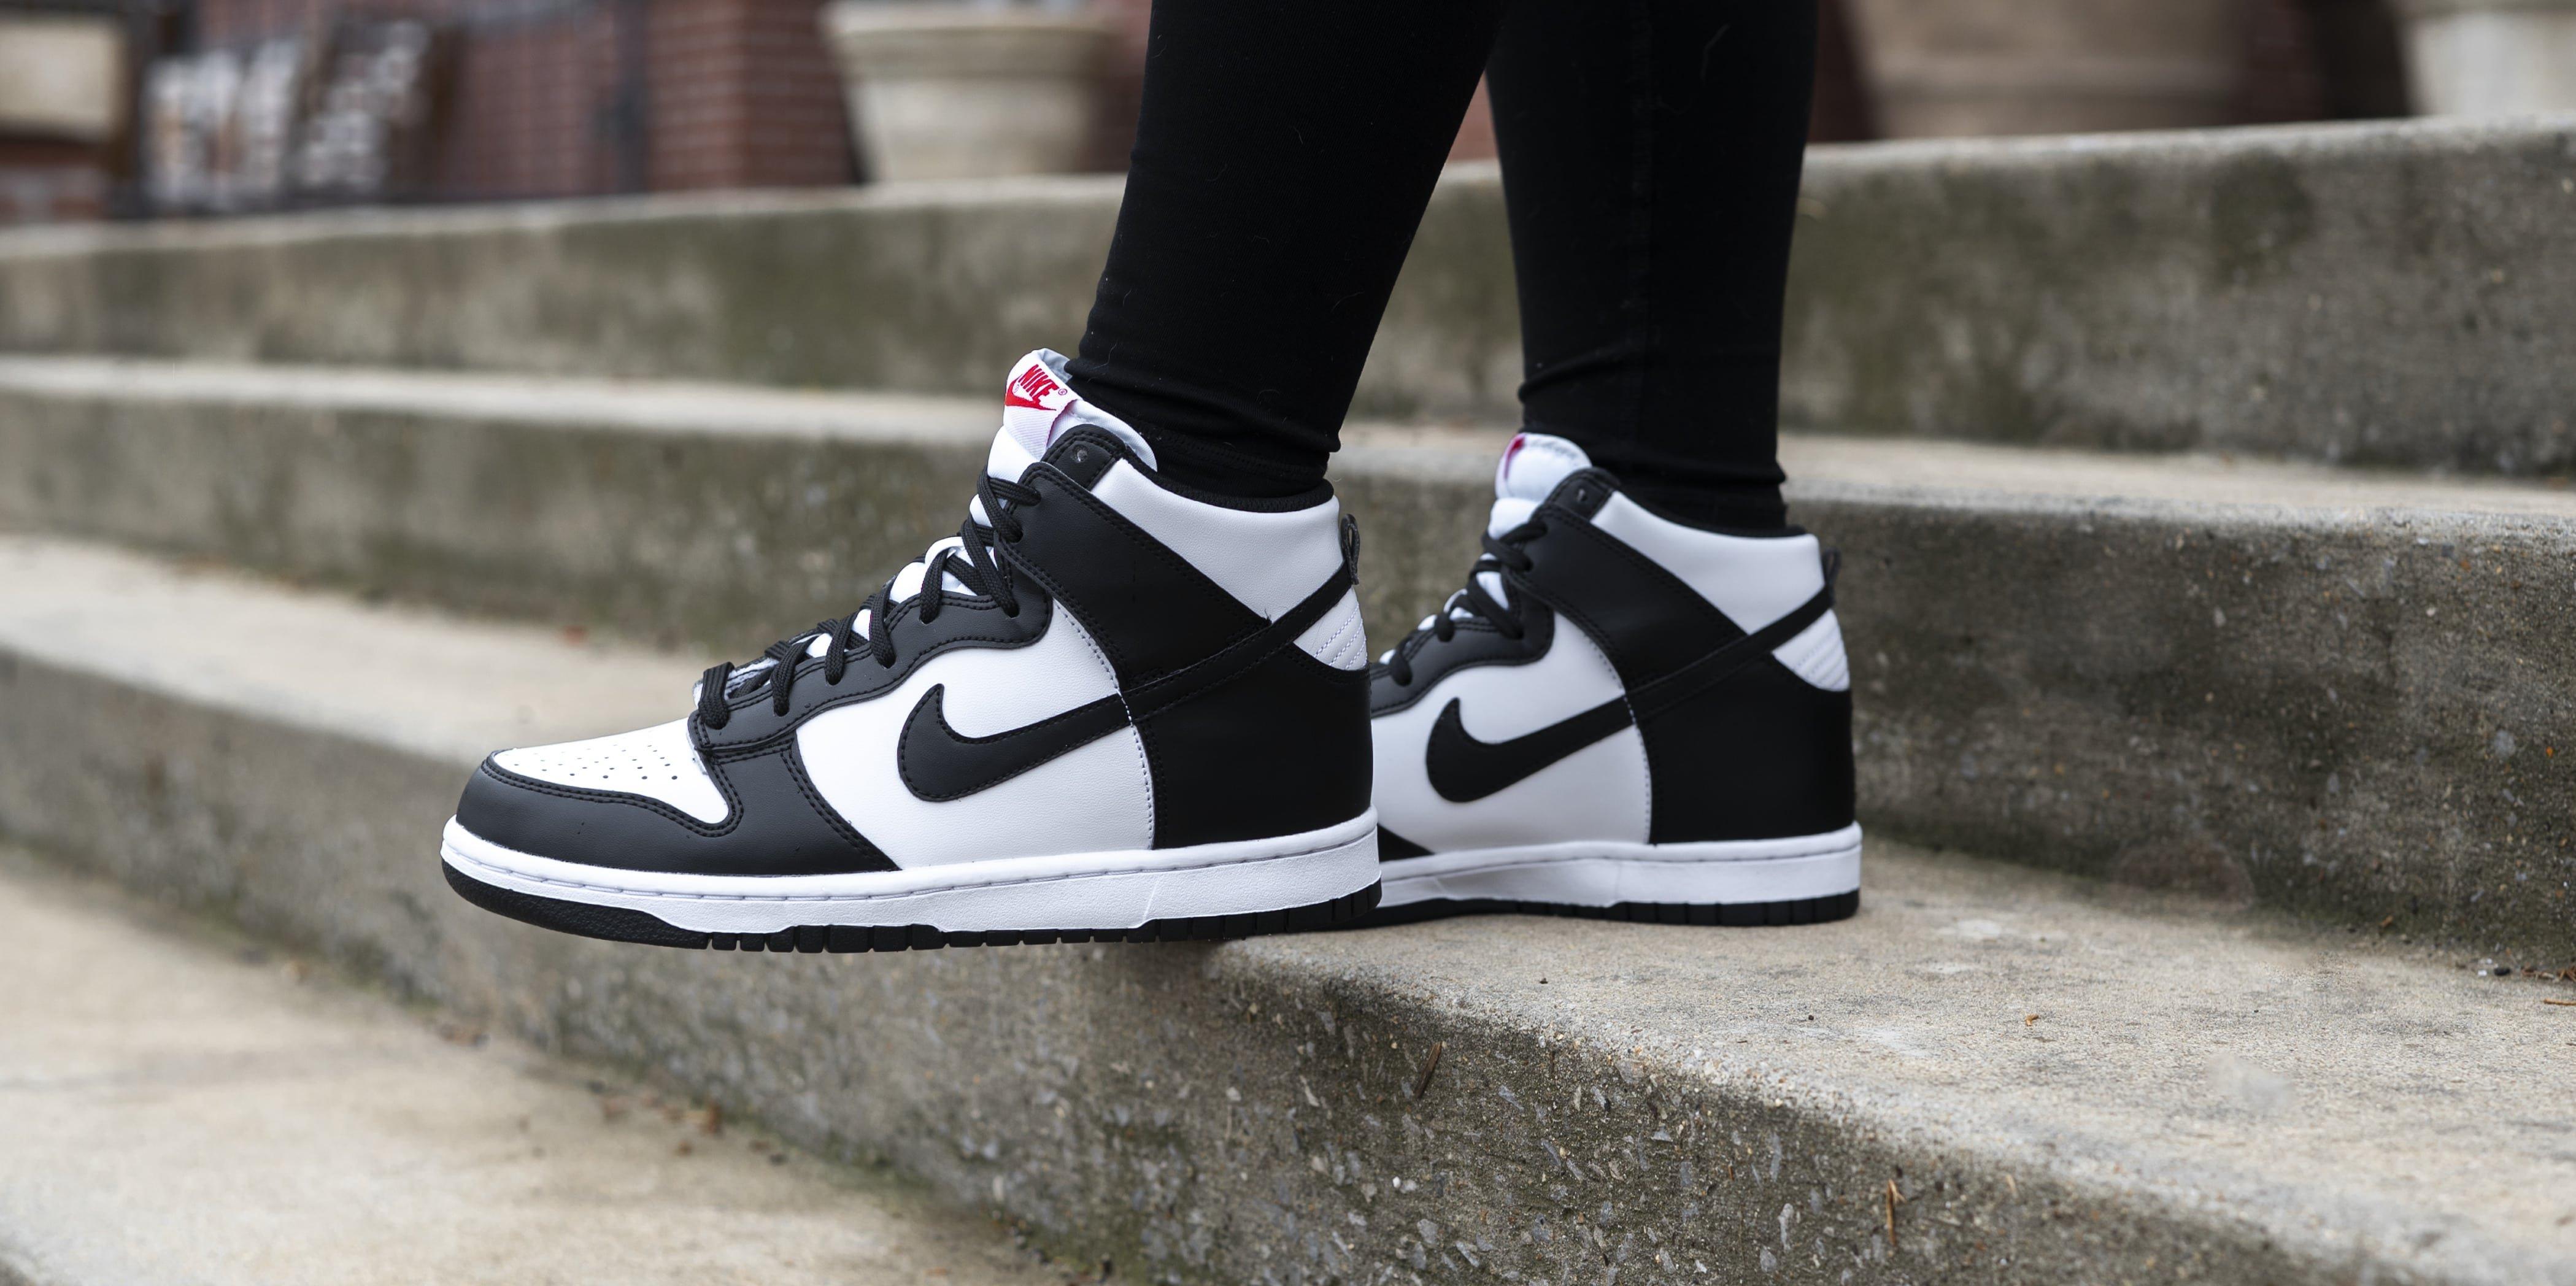 NIKE WMNS DUNK HIGH BLACK AND WHITE - personnel.rmutk.ac.th